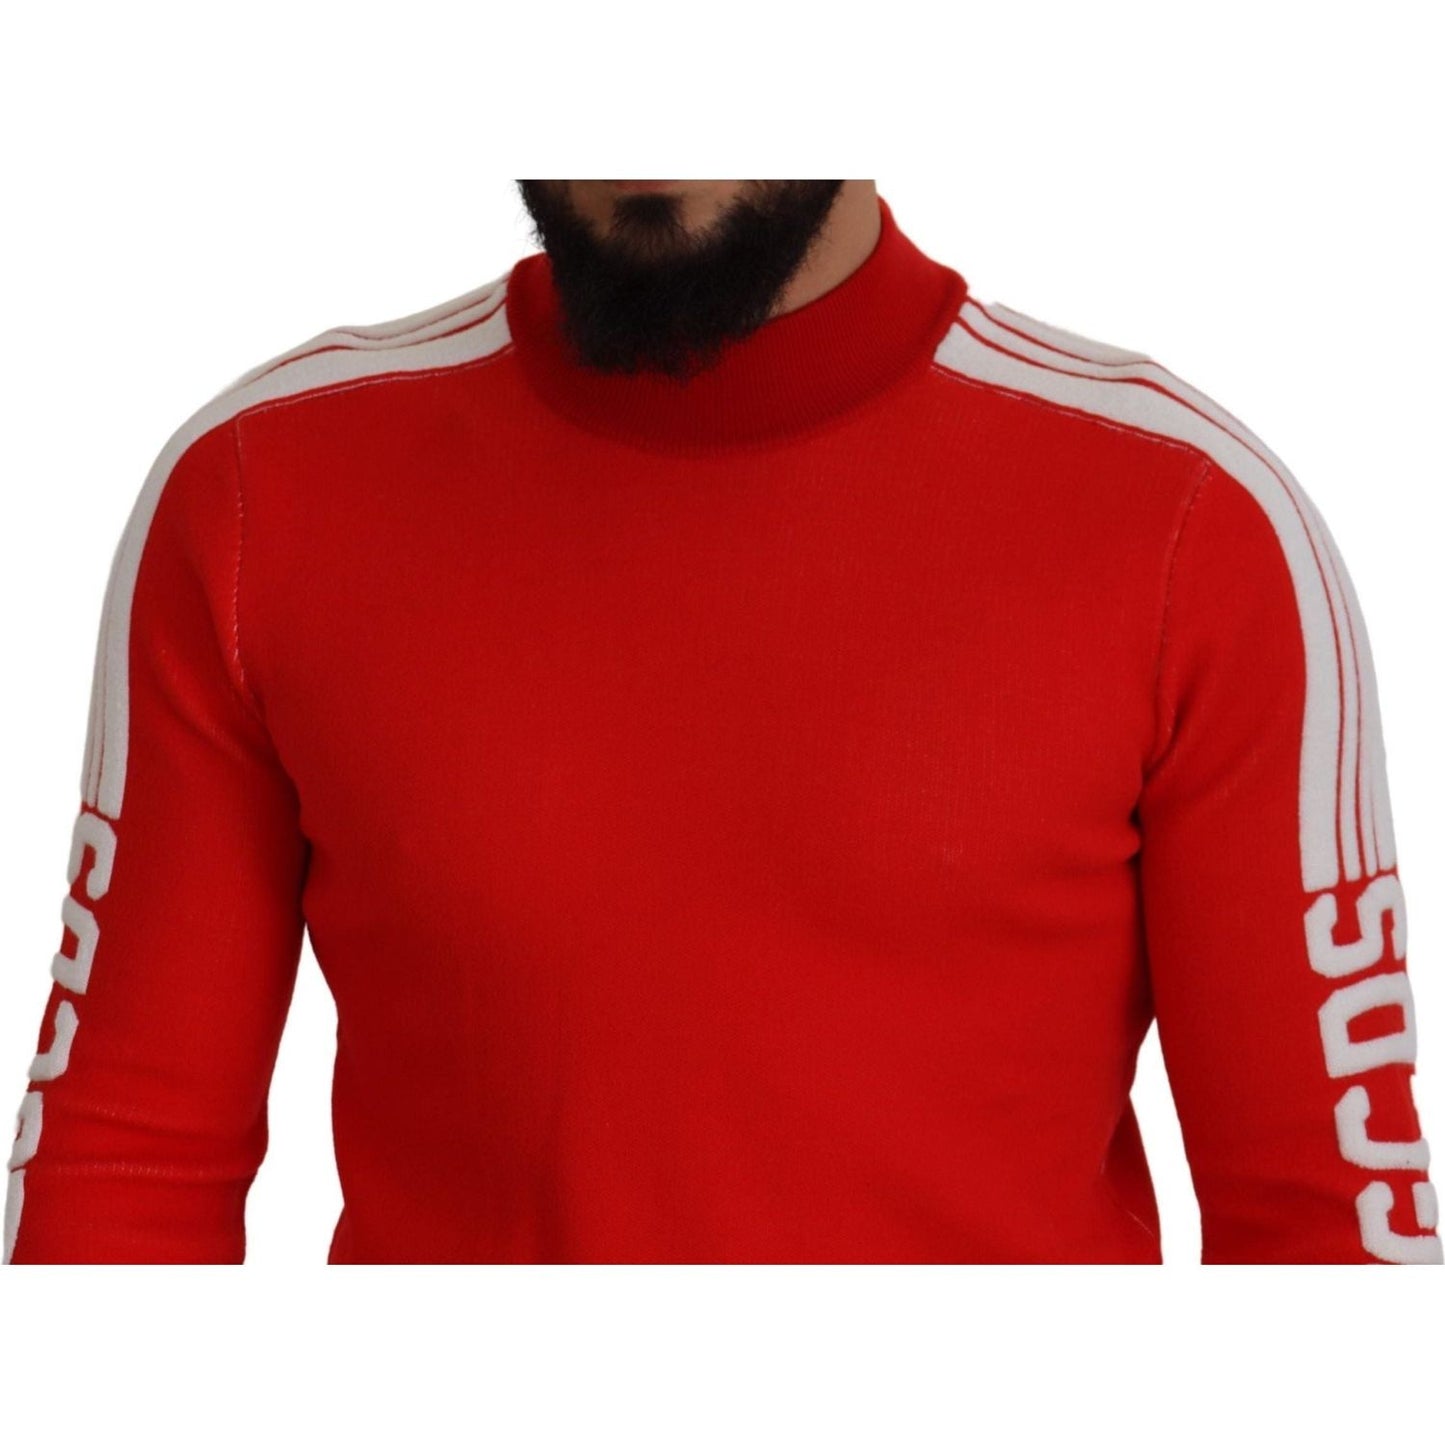 GCDS Elegant Red Pullover Sweater for Men red-wool-logo-printed-crew-neck-men-pullover-sweater IMG_0588-scaled-5ce718ba-7ba.jpg